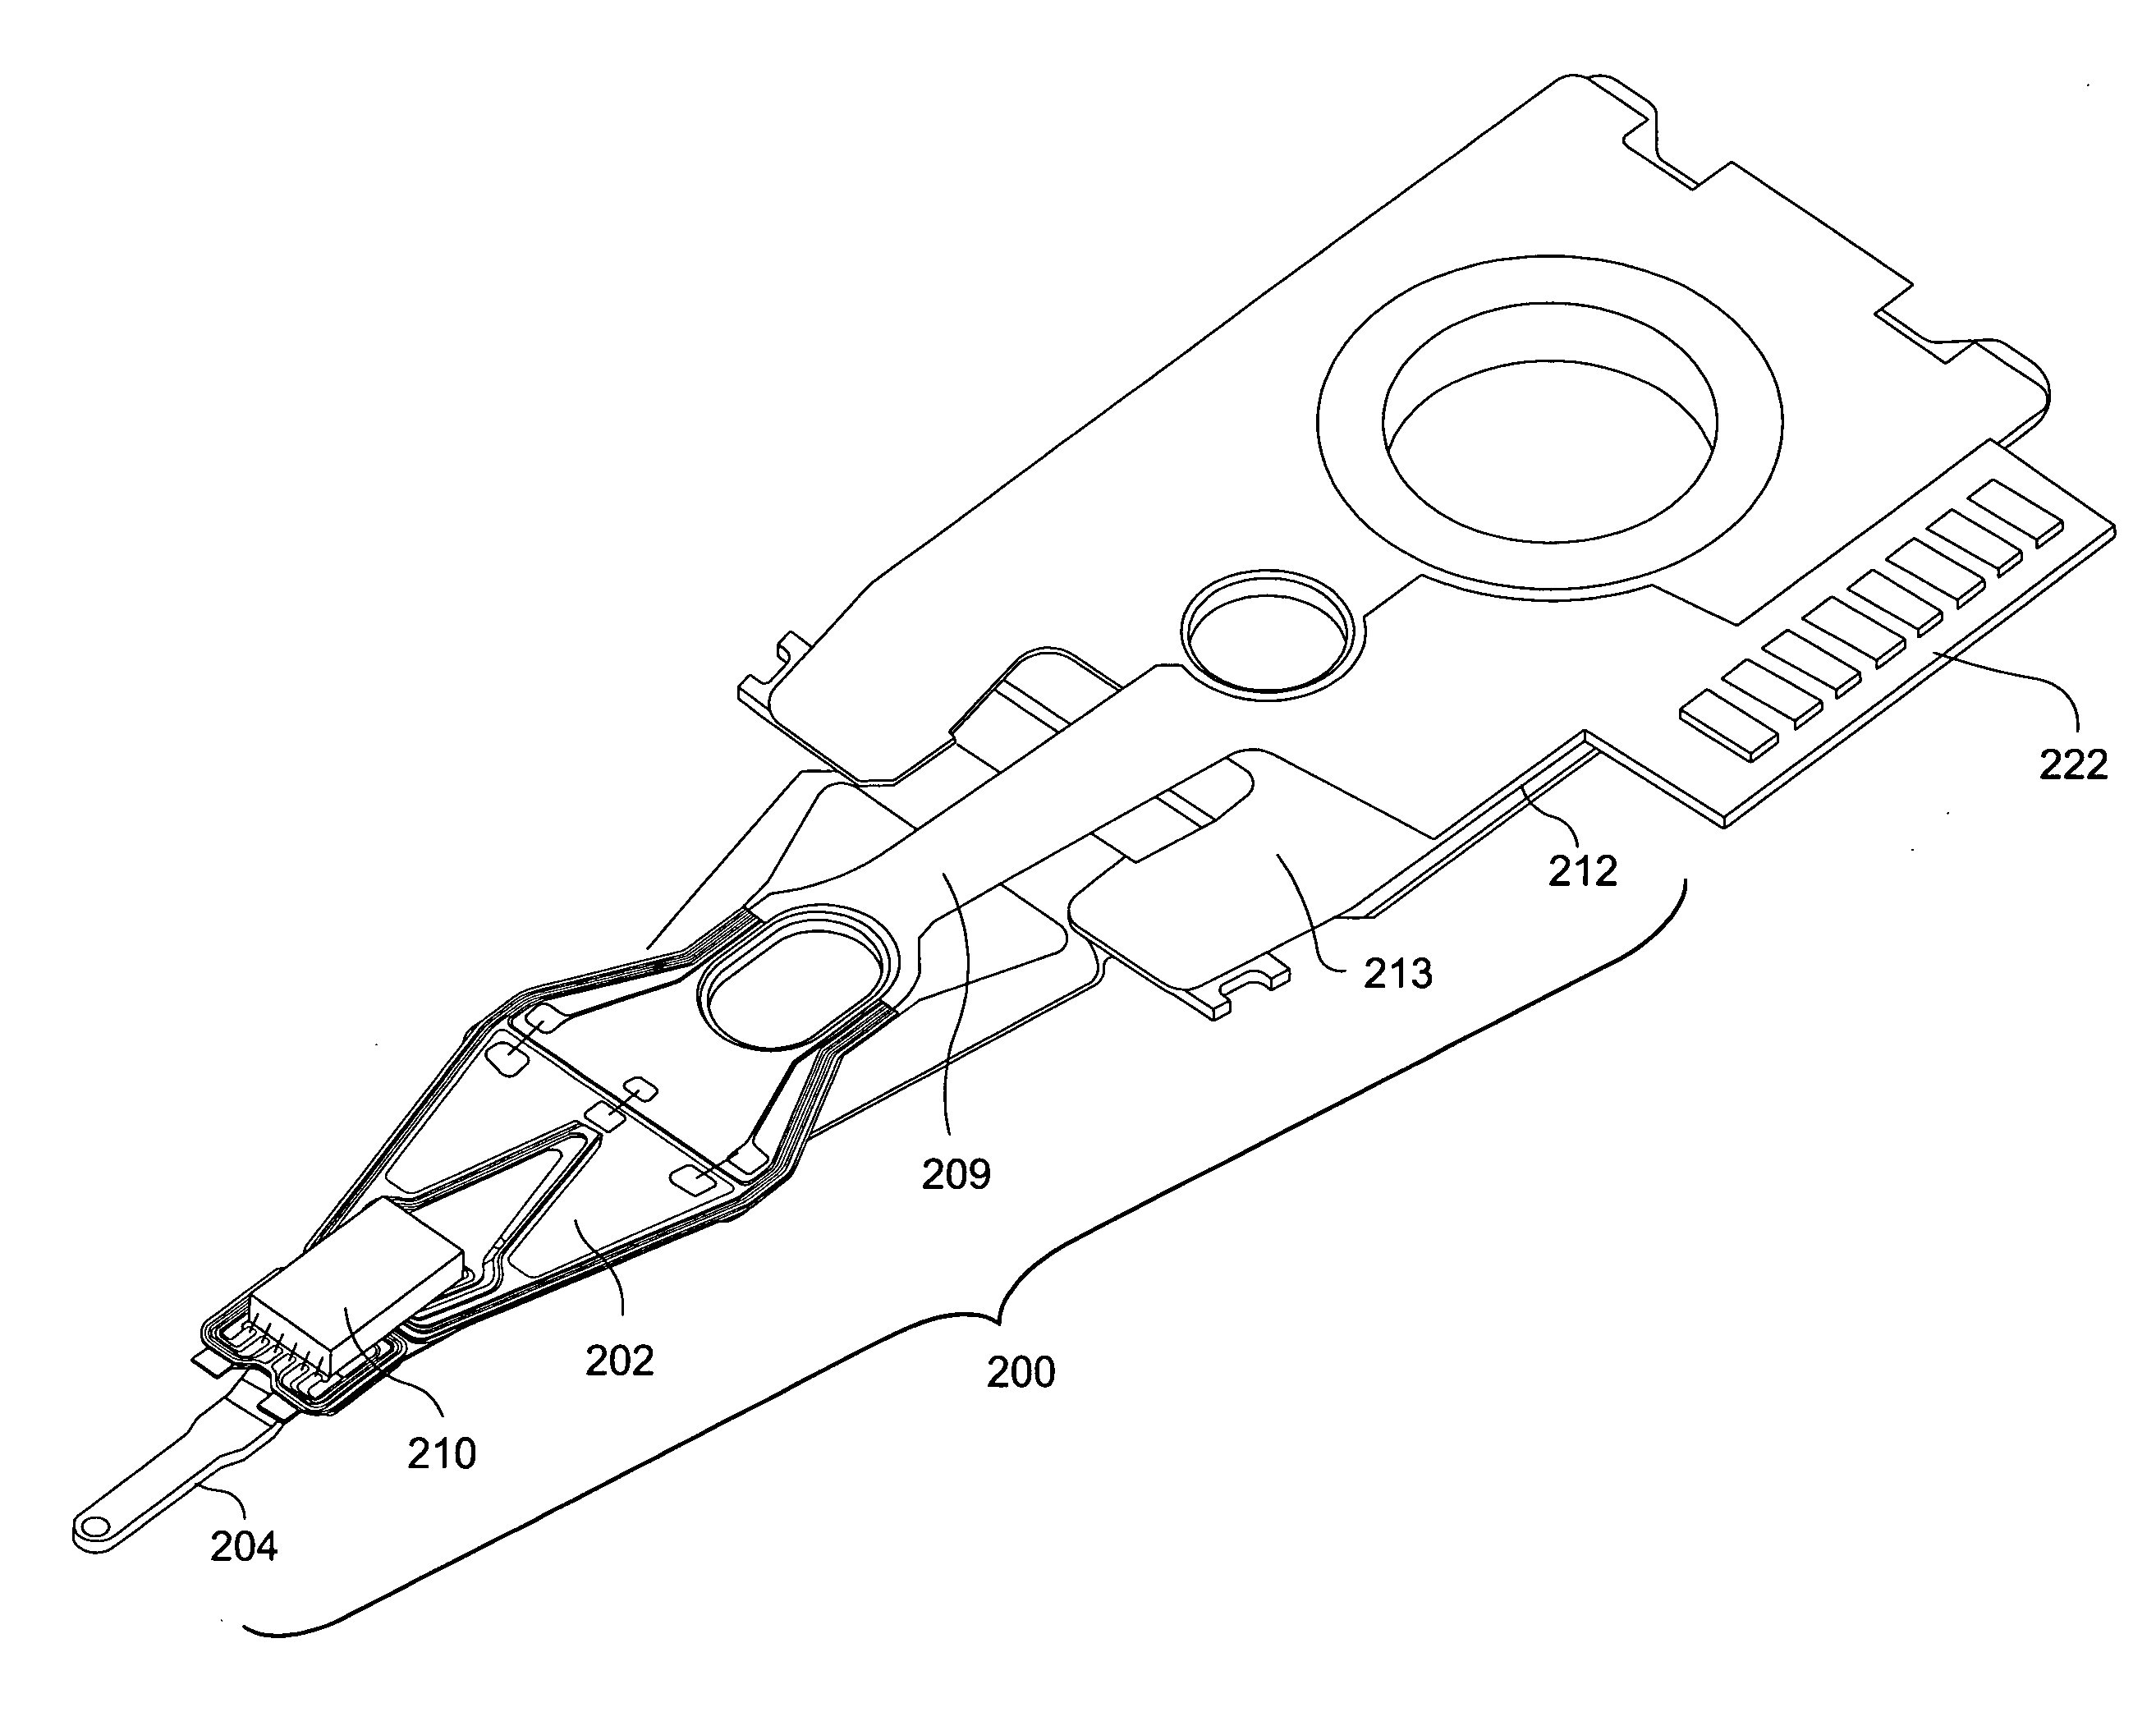 Head gimbal assembly for use in disk drive devices and method of making the same